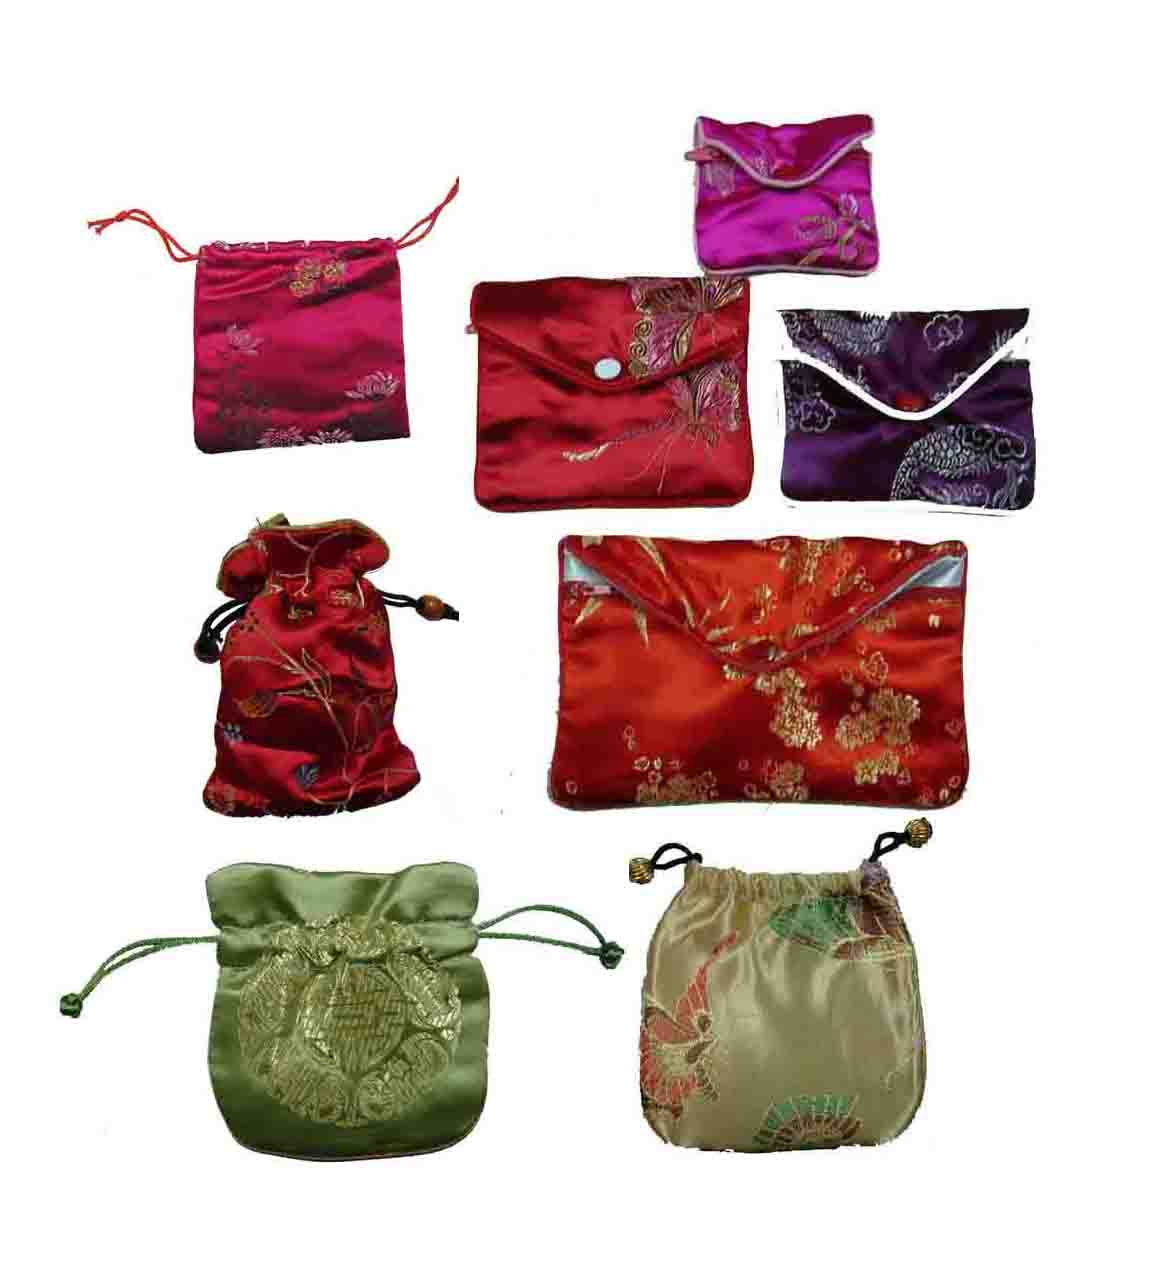  Chinese Pouch (Chinesisch Pouch)